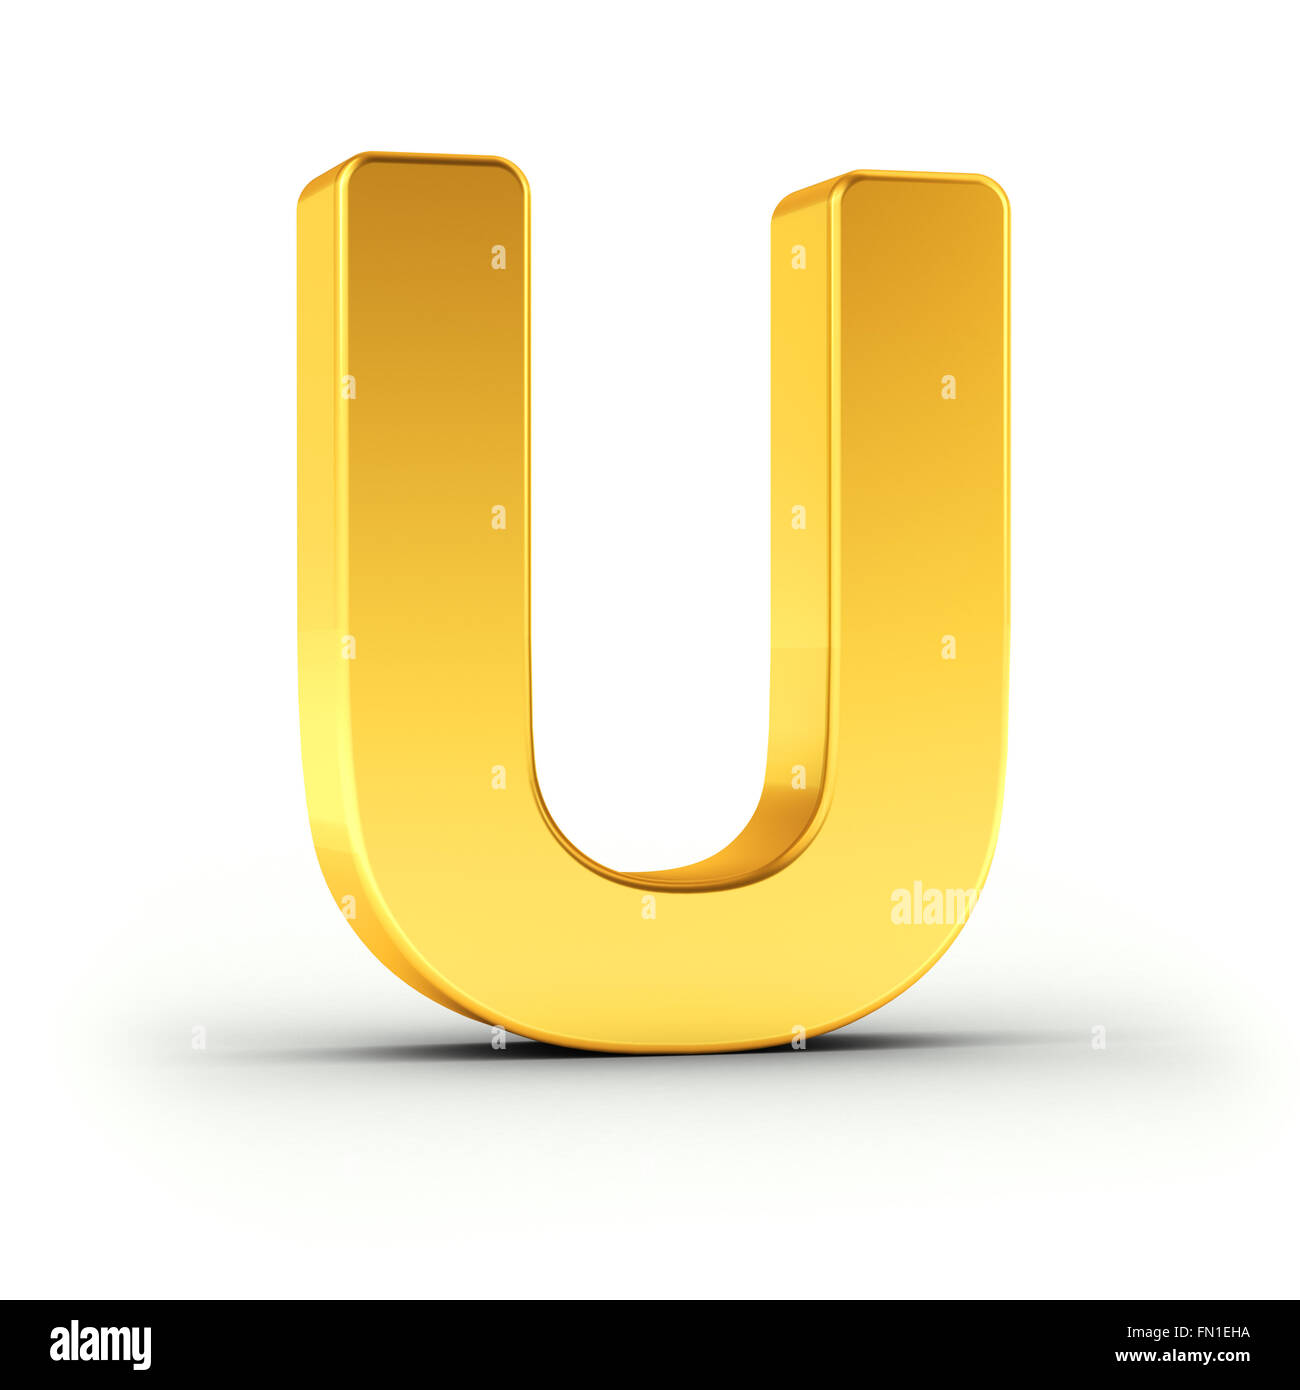 The Letter U Photo golden Alamy a polished object as - Stock